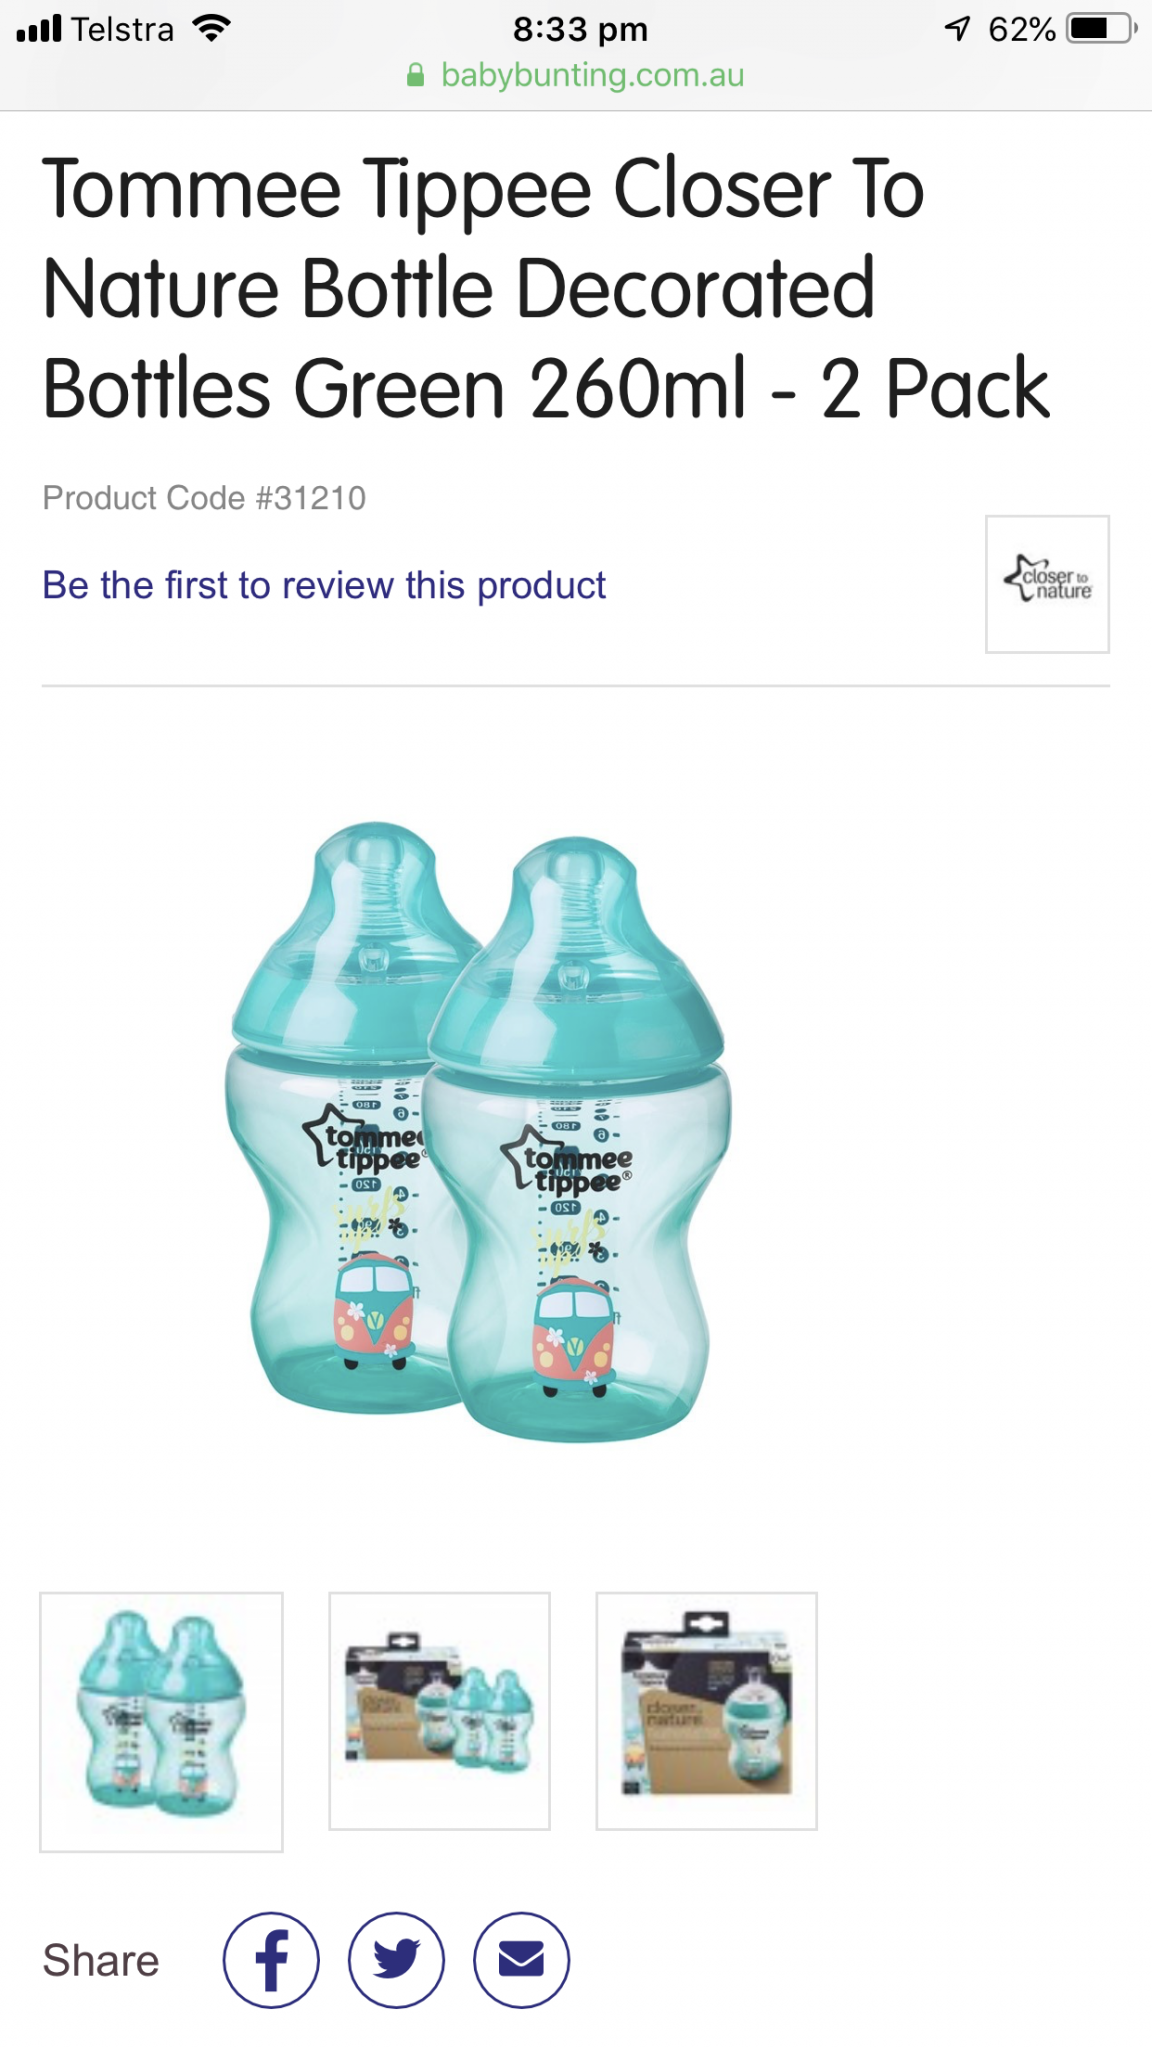 Tommee Tippee Closer to Nature Decorated Bottles